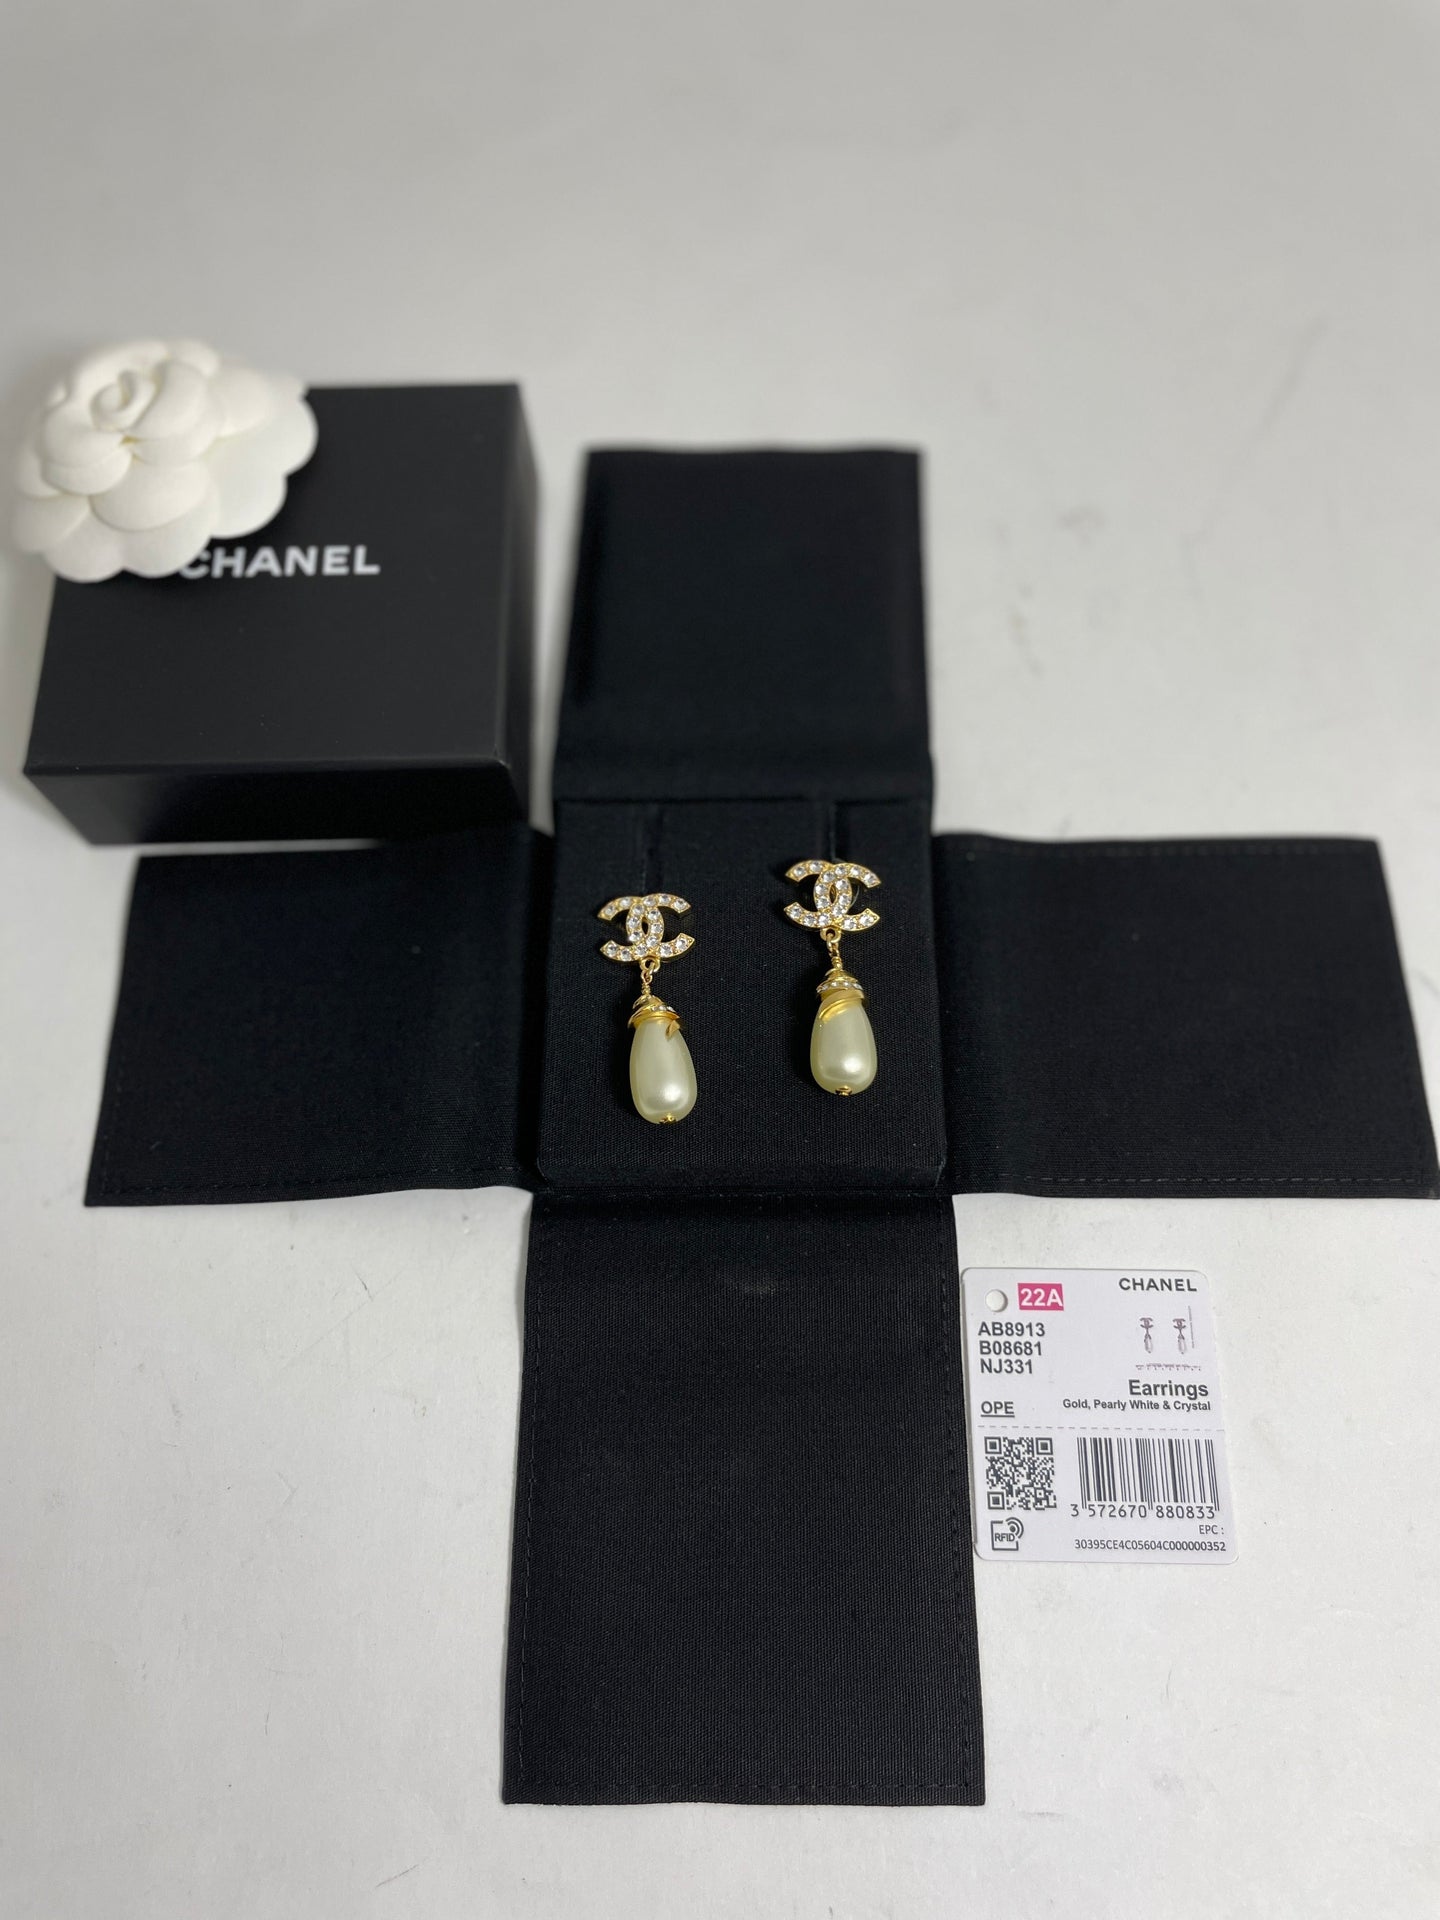 Chanel 22A CC Crystal Gold Tone Oval Pearl Drop Earrings